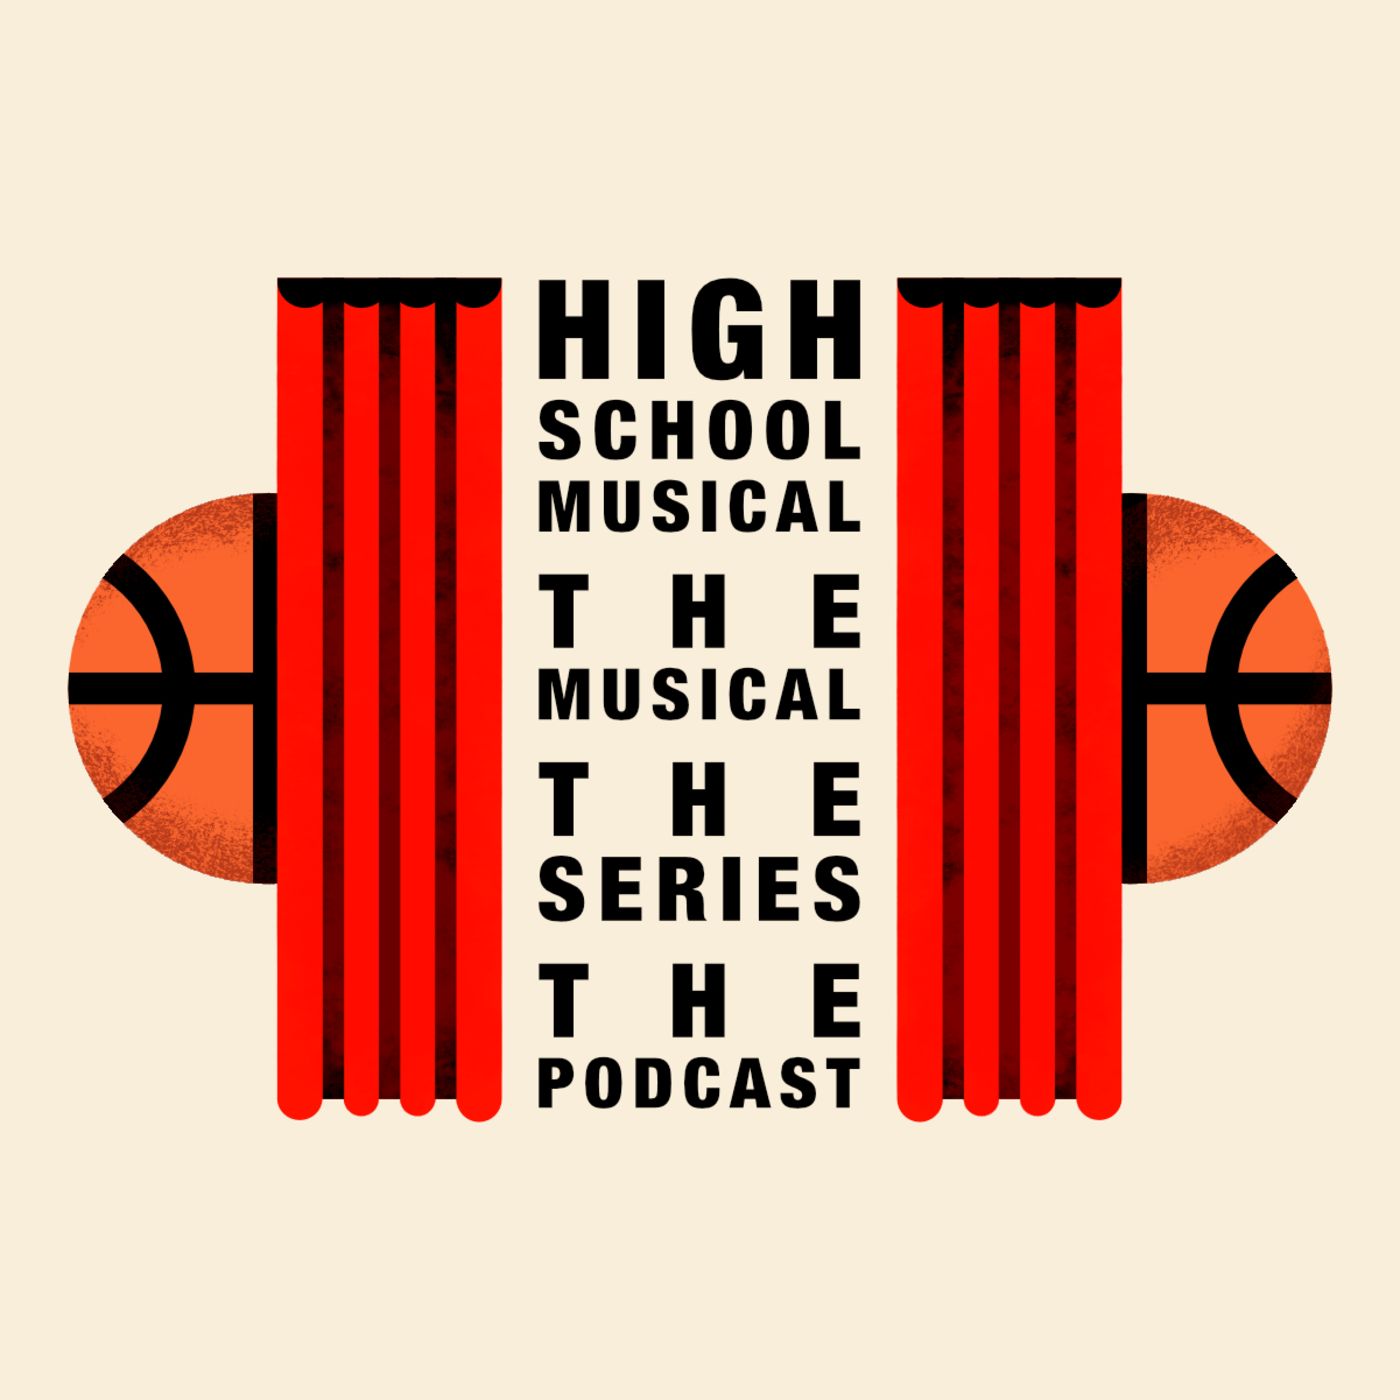 High School Musical: The Musical: The Series: The Podcast